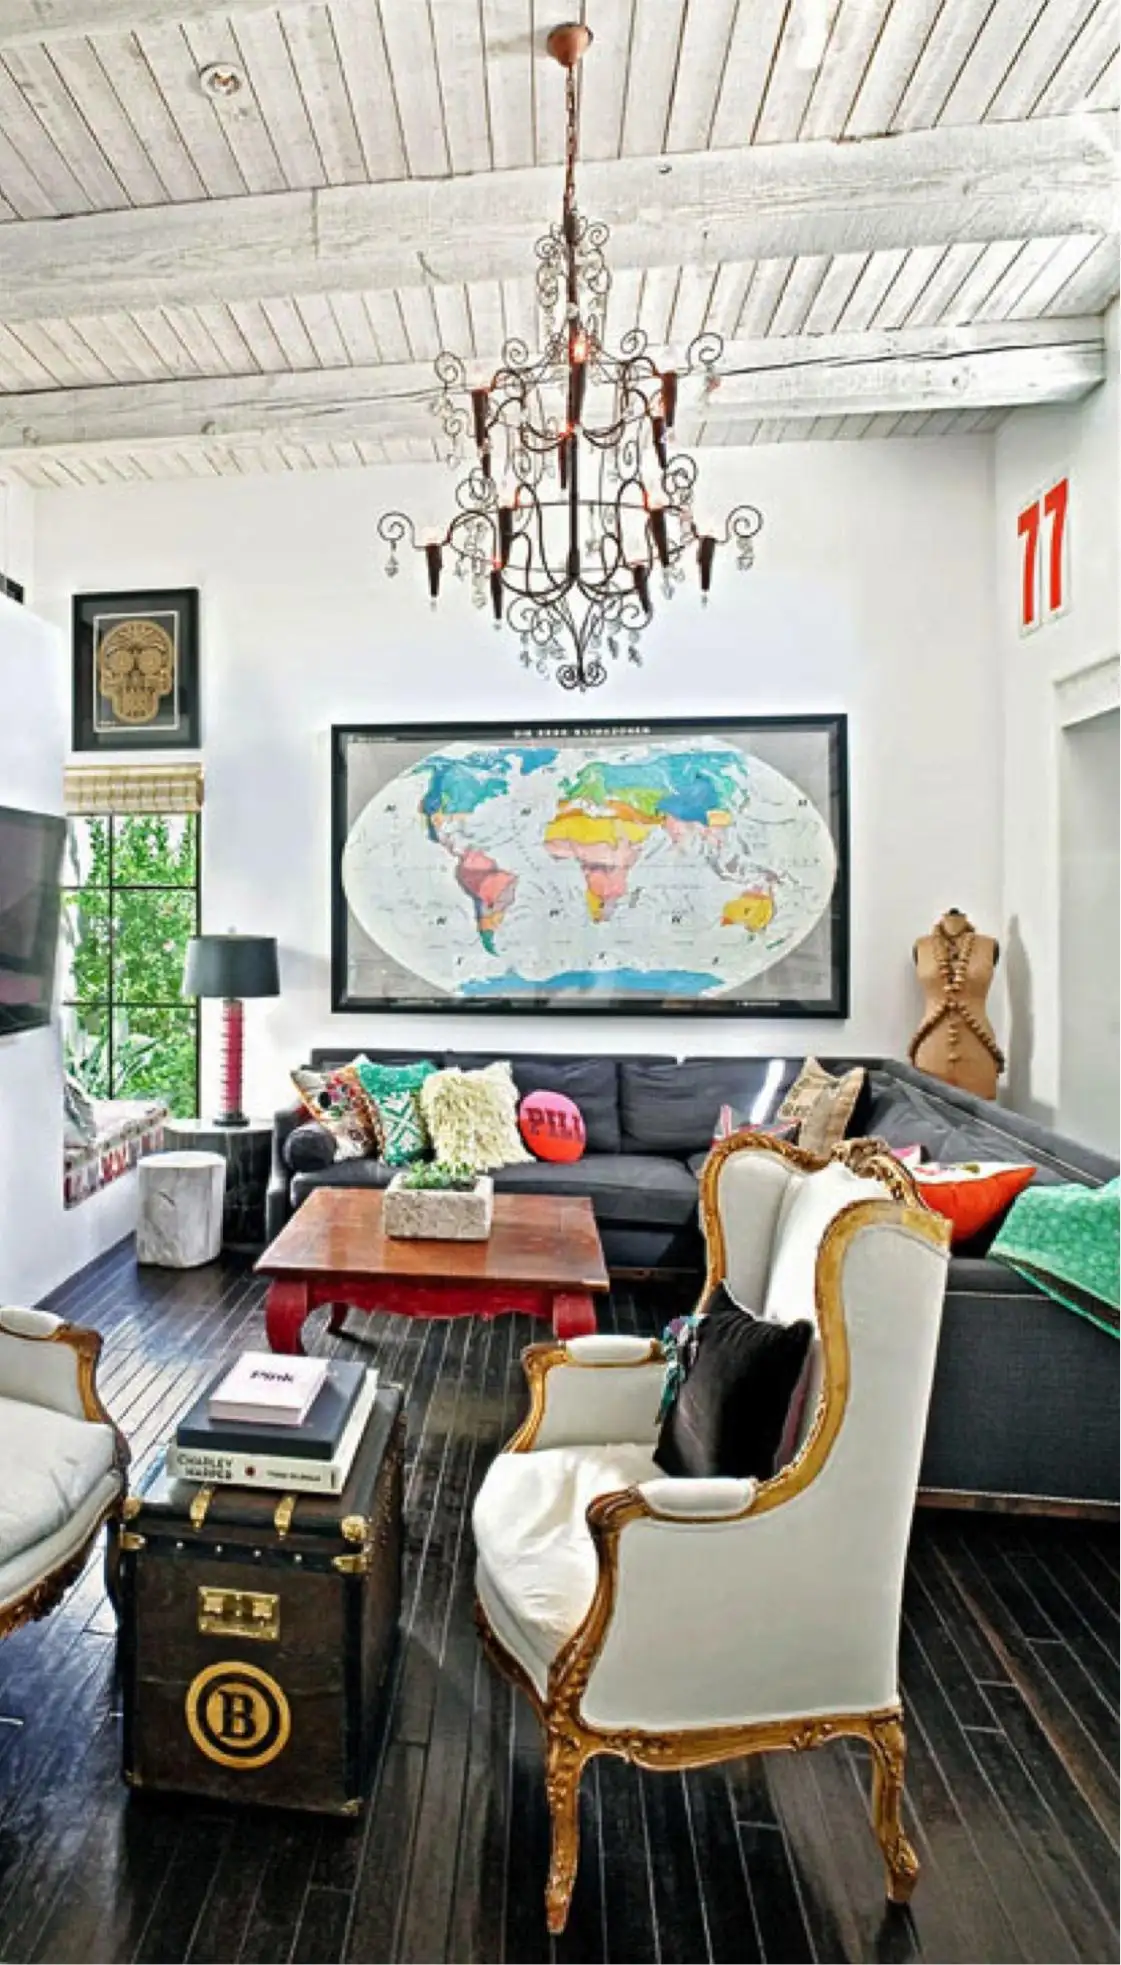 Eclectic d?cor: blending antique and modern items